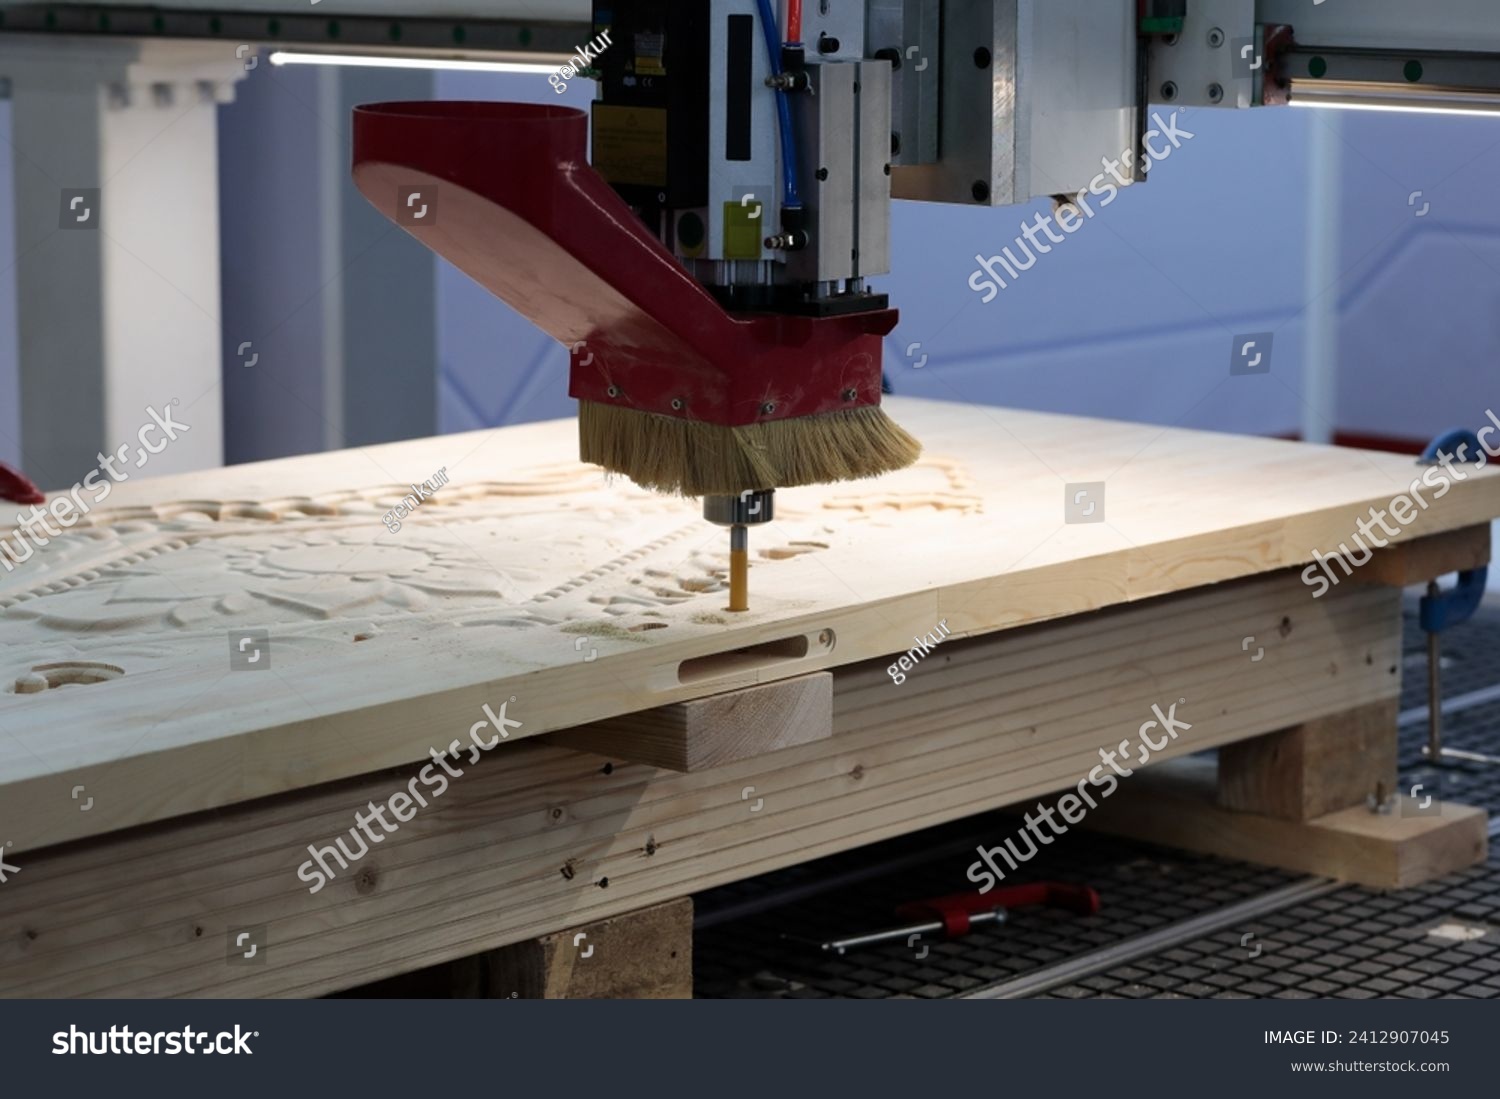 Wooden door manufacturing with CNC router machine. Selective focus. #2412907045